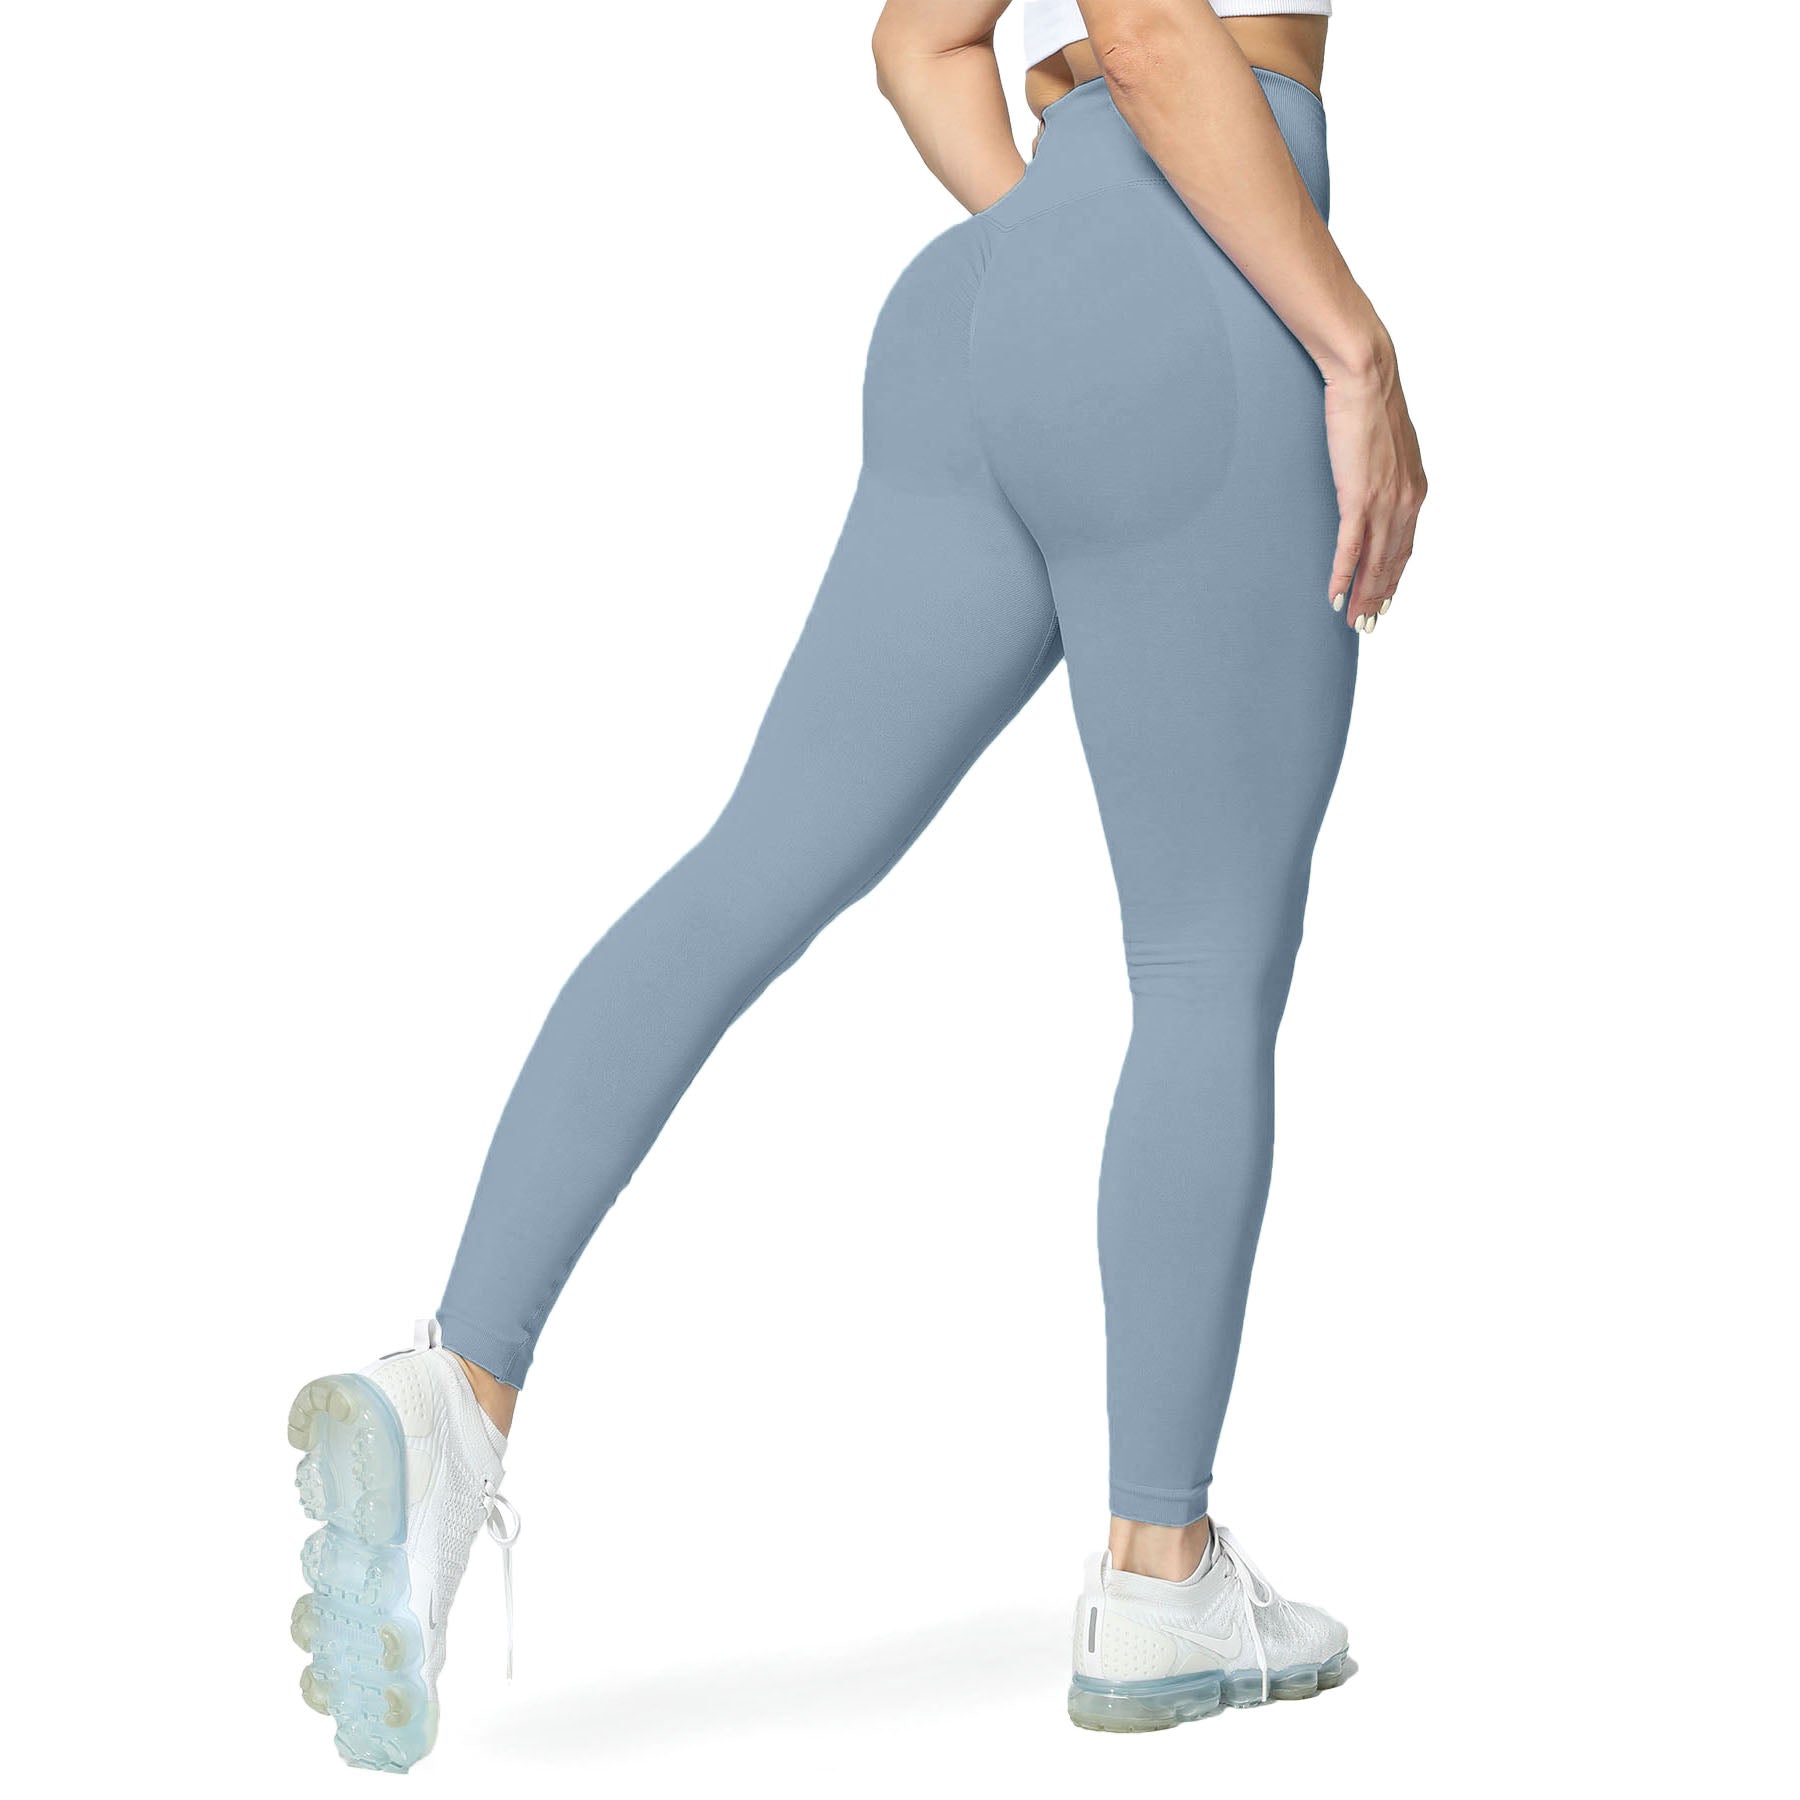 Aoxjox Workout Leggings for Women Tummy Control Butt Lifting Revye